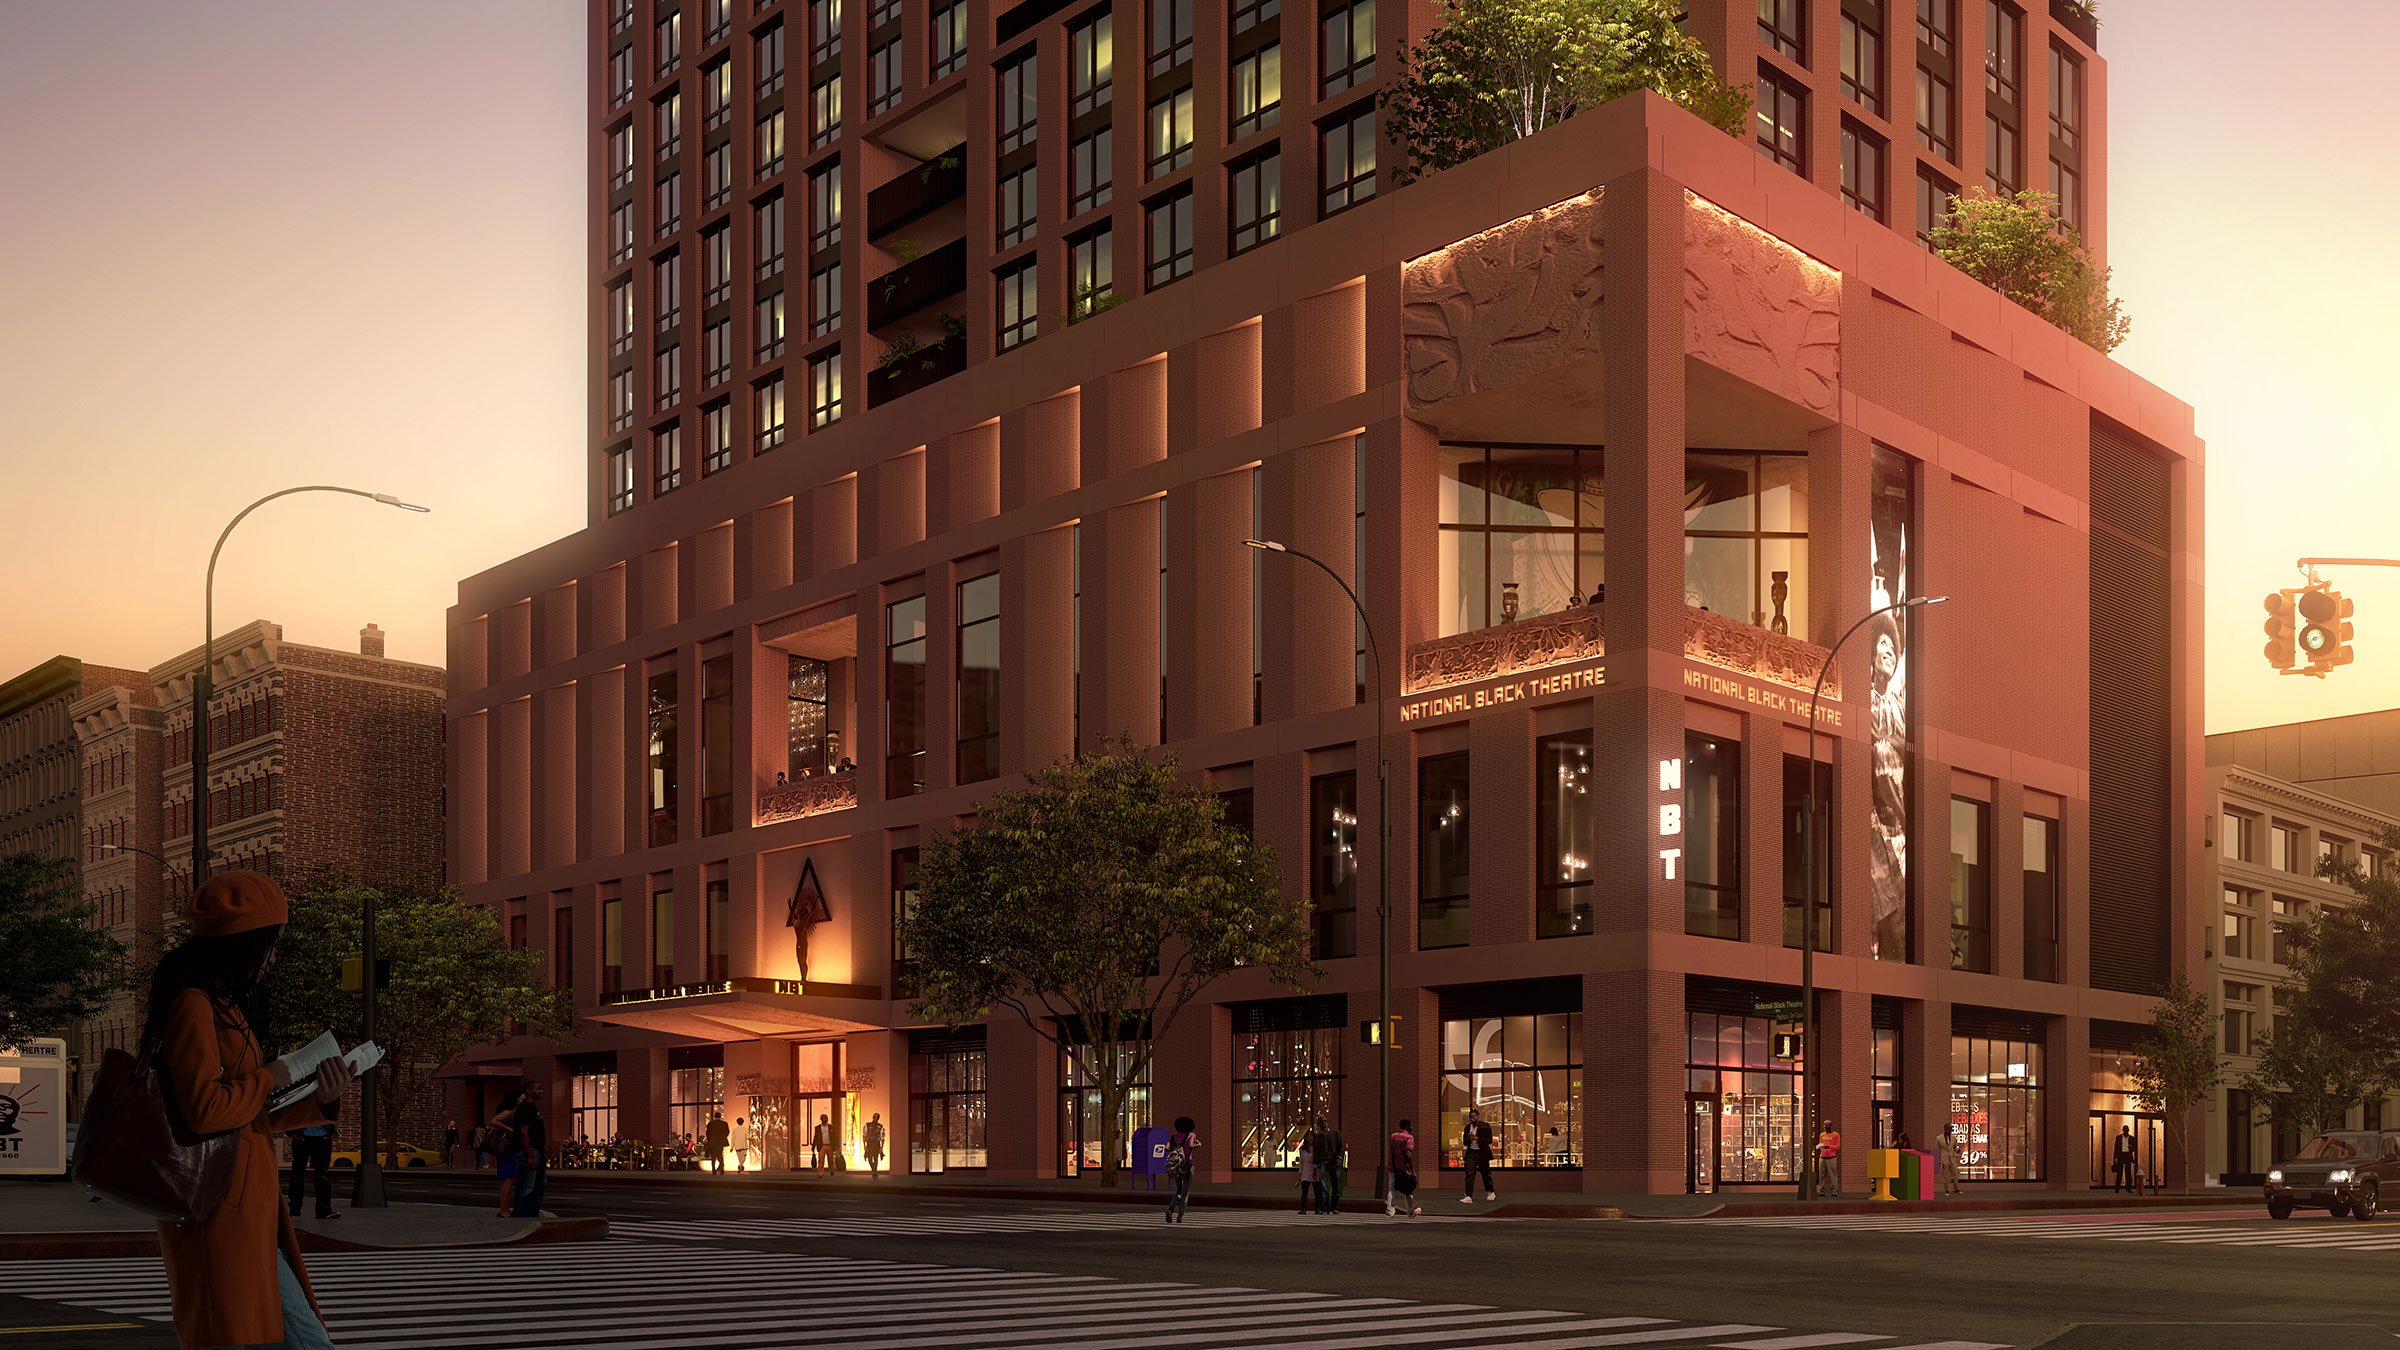 Rendering of Ray Harlem (courtesy Luxigon); the development will include the National Black Theatre with work by Little Wing Lee, MS Interior Design ’06